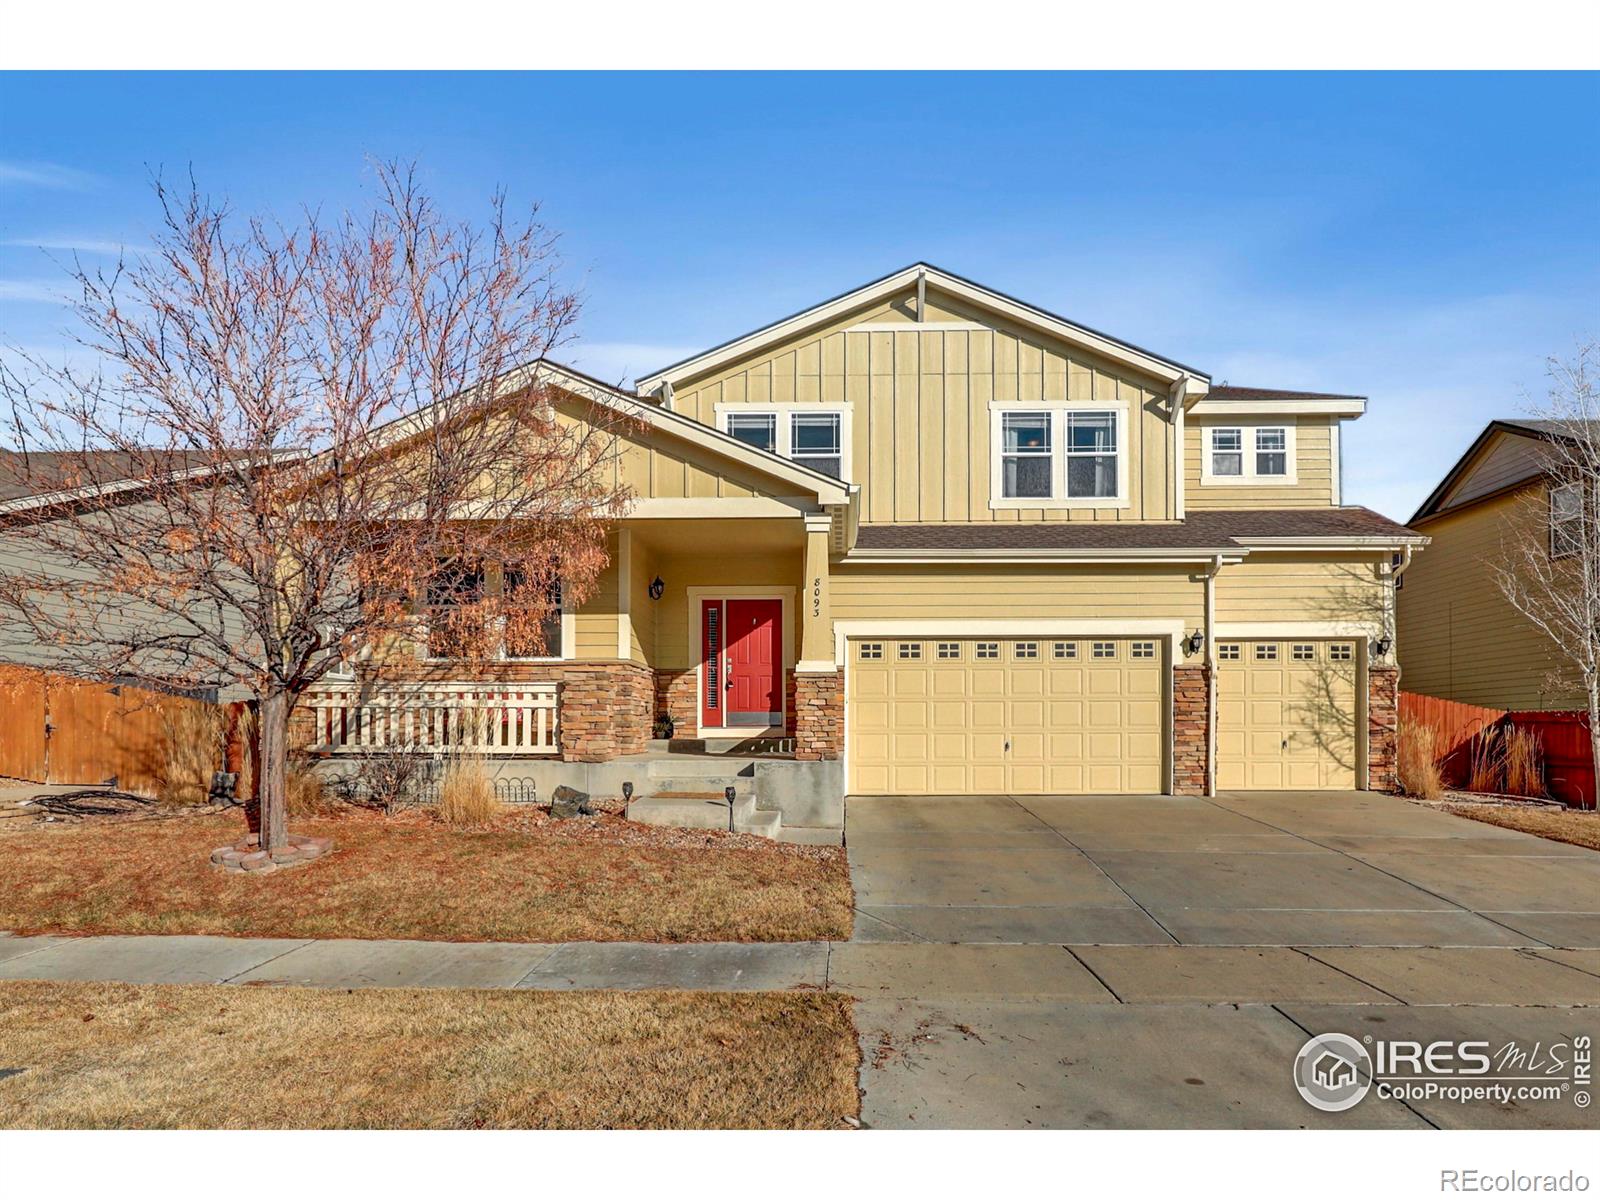 8093 E 134th Place, thornton MLS: 4567891002029 Beds: 6 Baths: 5 Price: $745,000